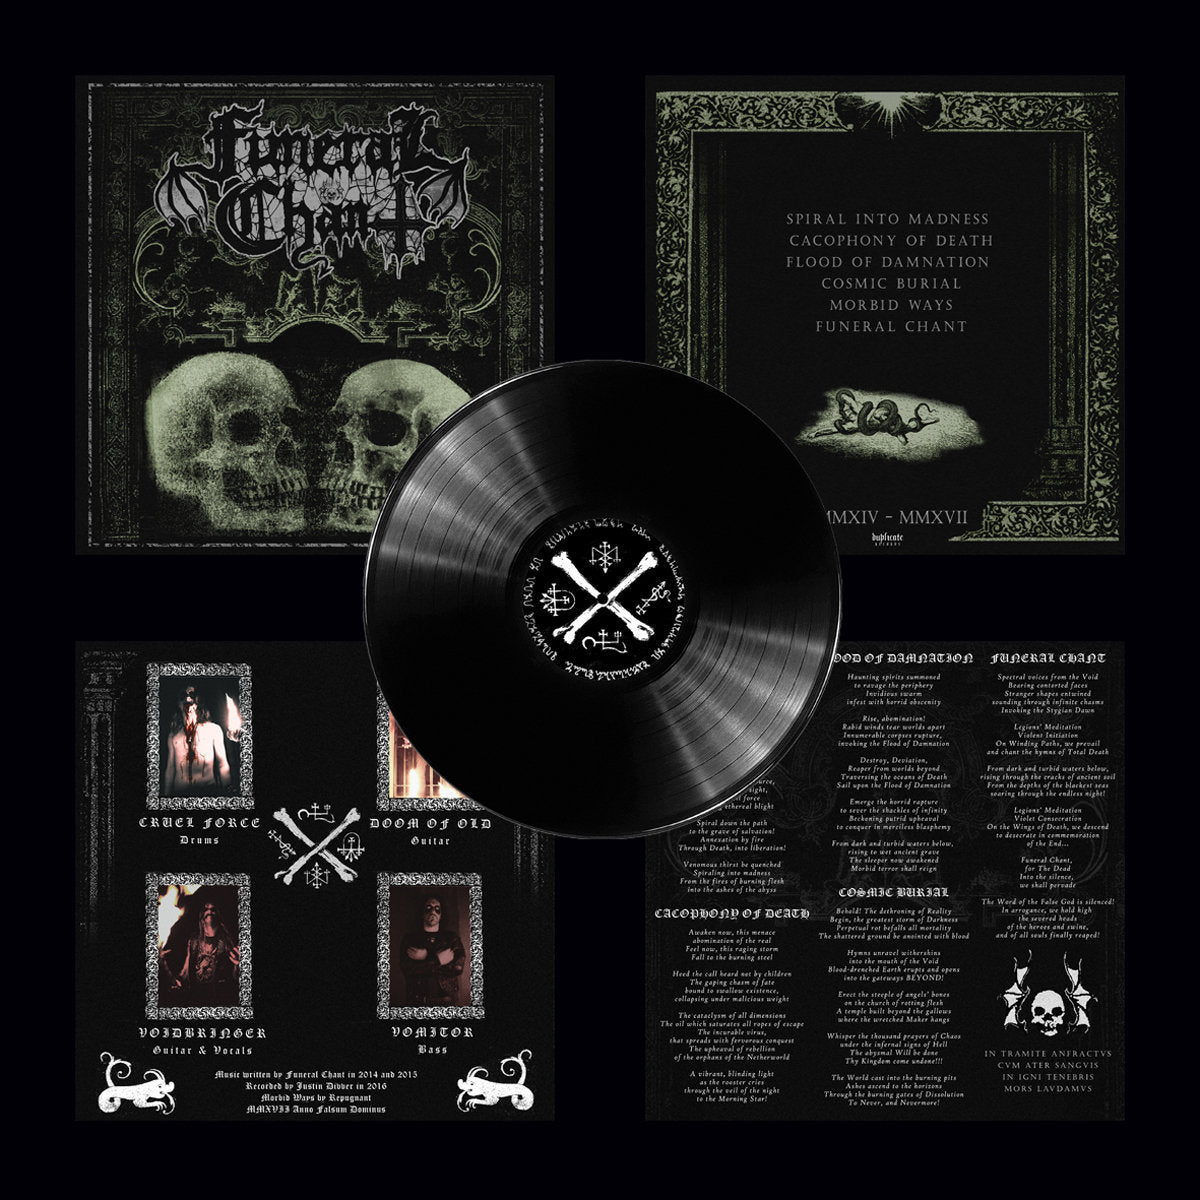 FUNERAL CHANT - Funeral Chant LP